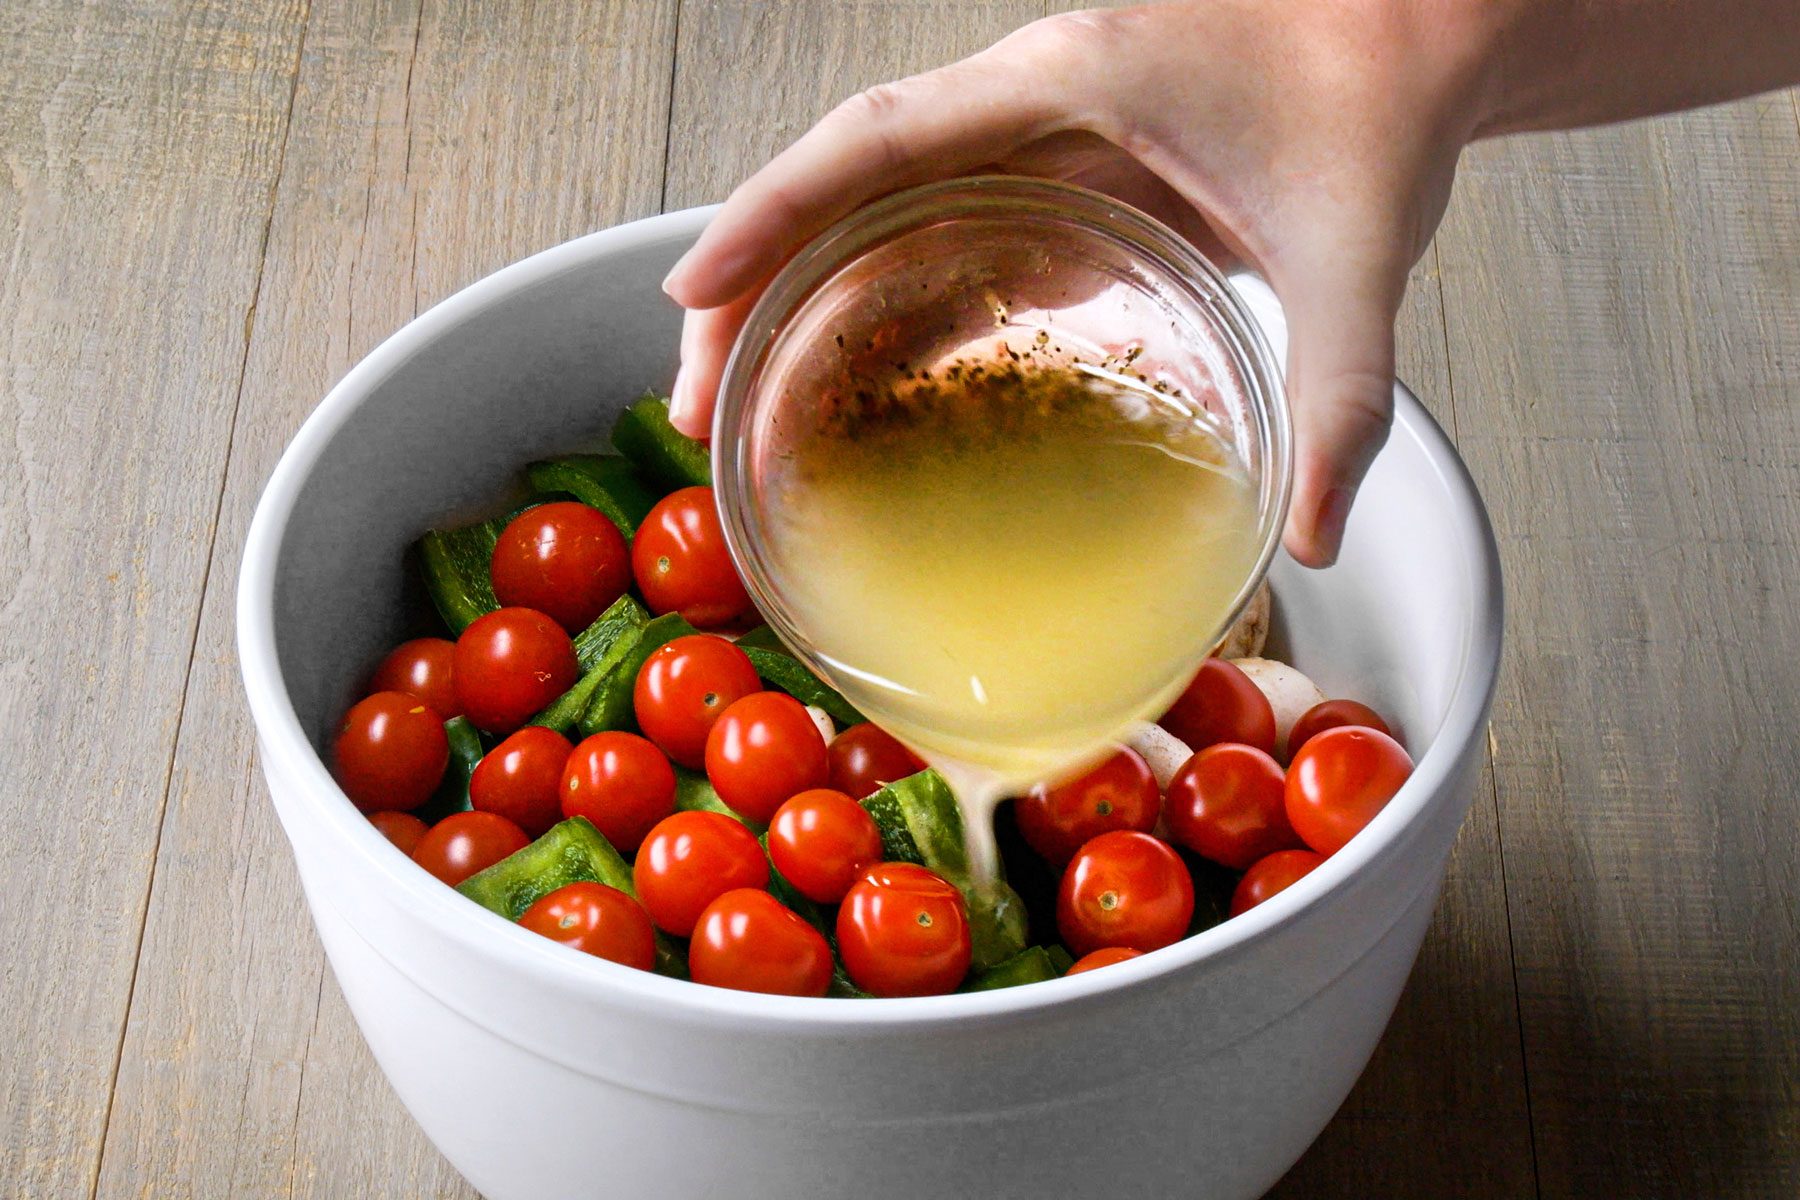 Pouring salad dressing on vegetables in a large bowl